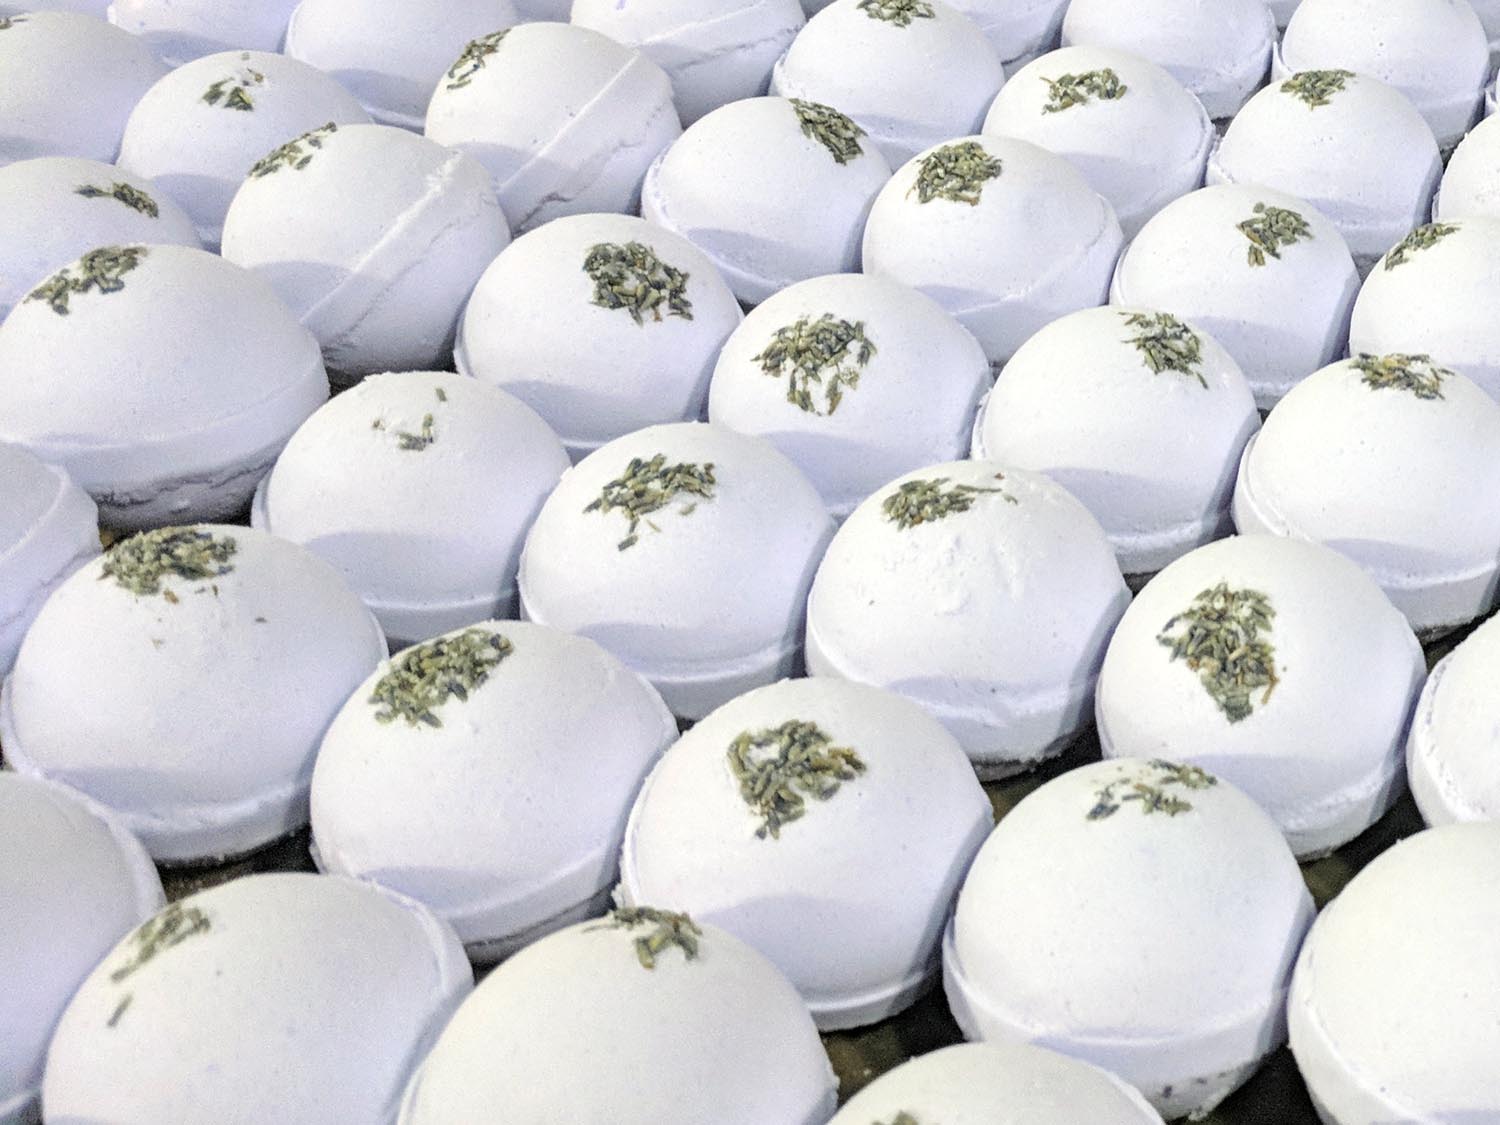 Where to buy 200 Assorted Bath Bombs